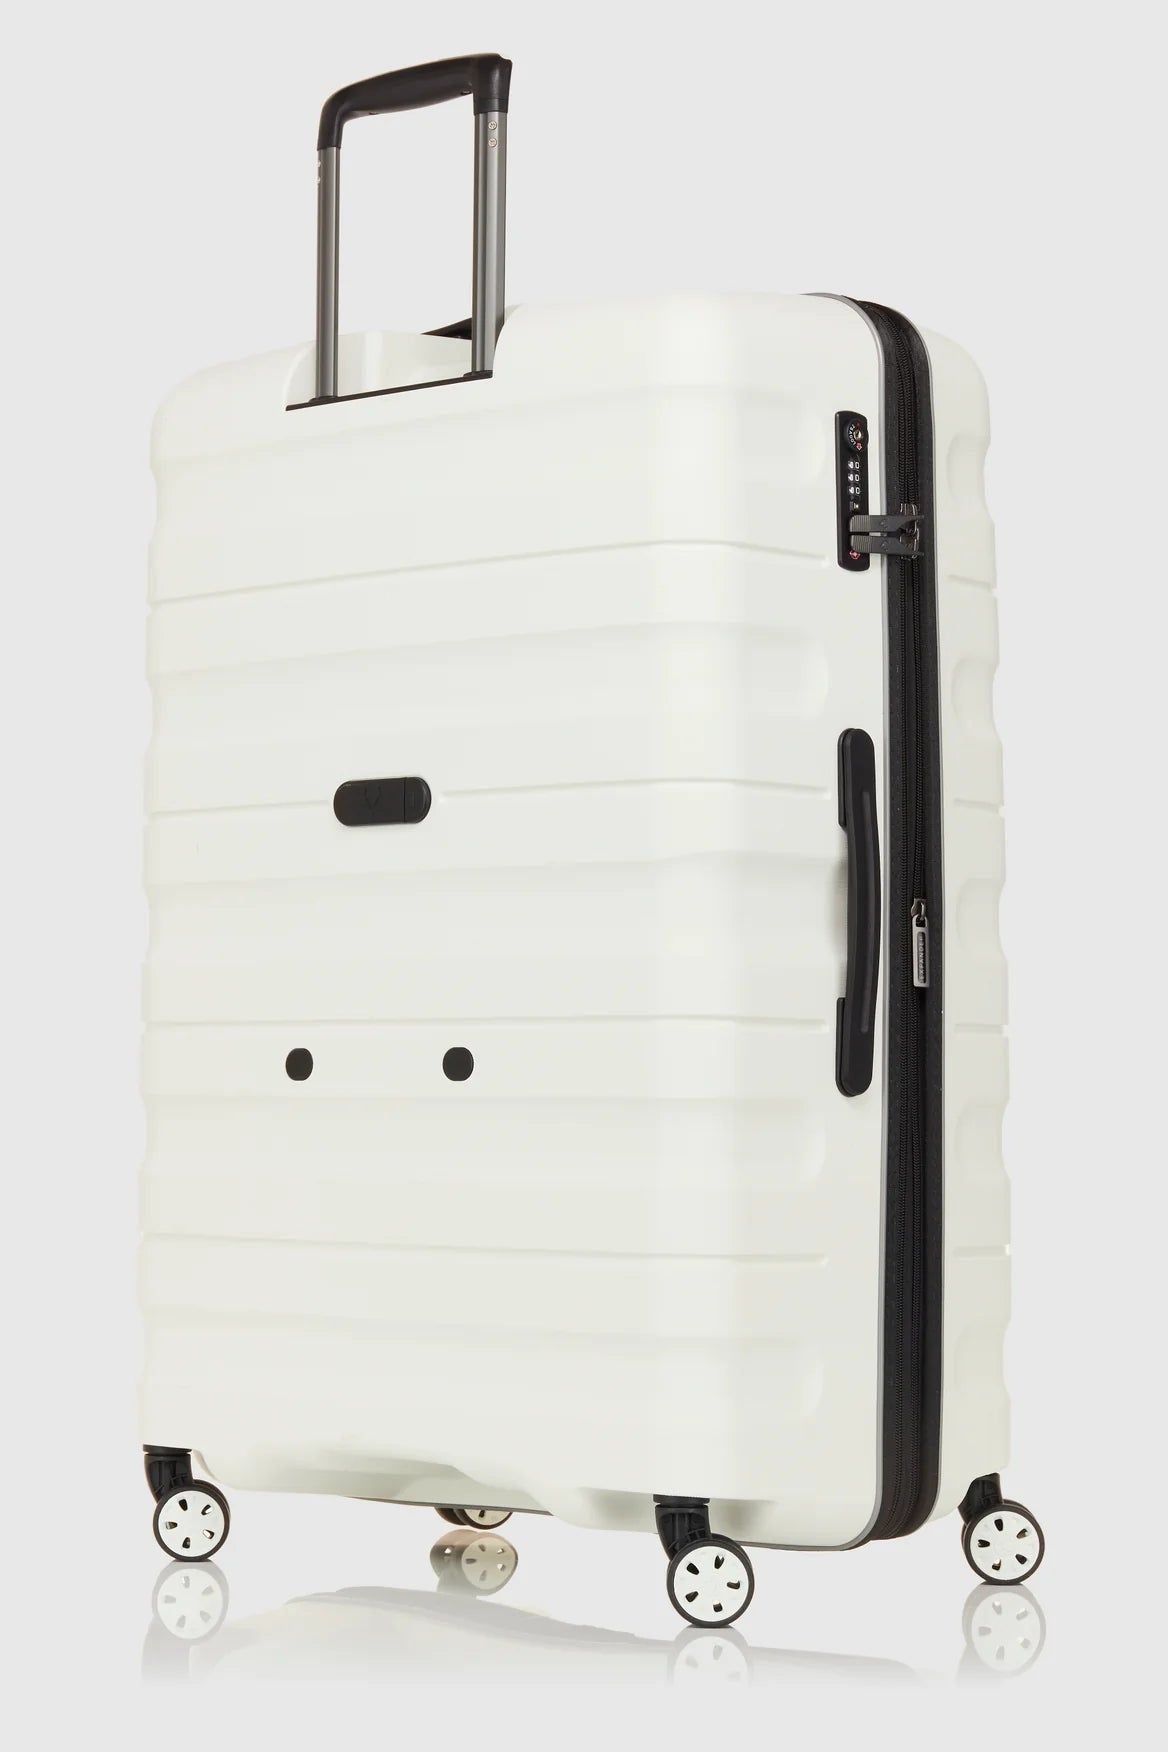 Antler Lincoln 56cm Carry On Hardsided Luggage - White - rainbowbags